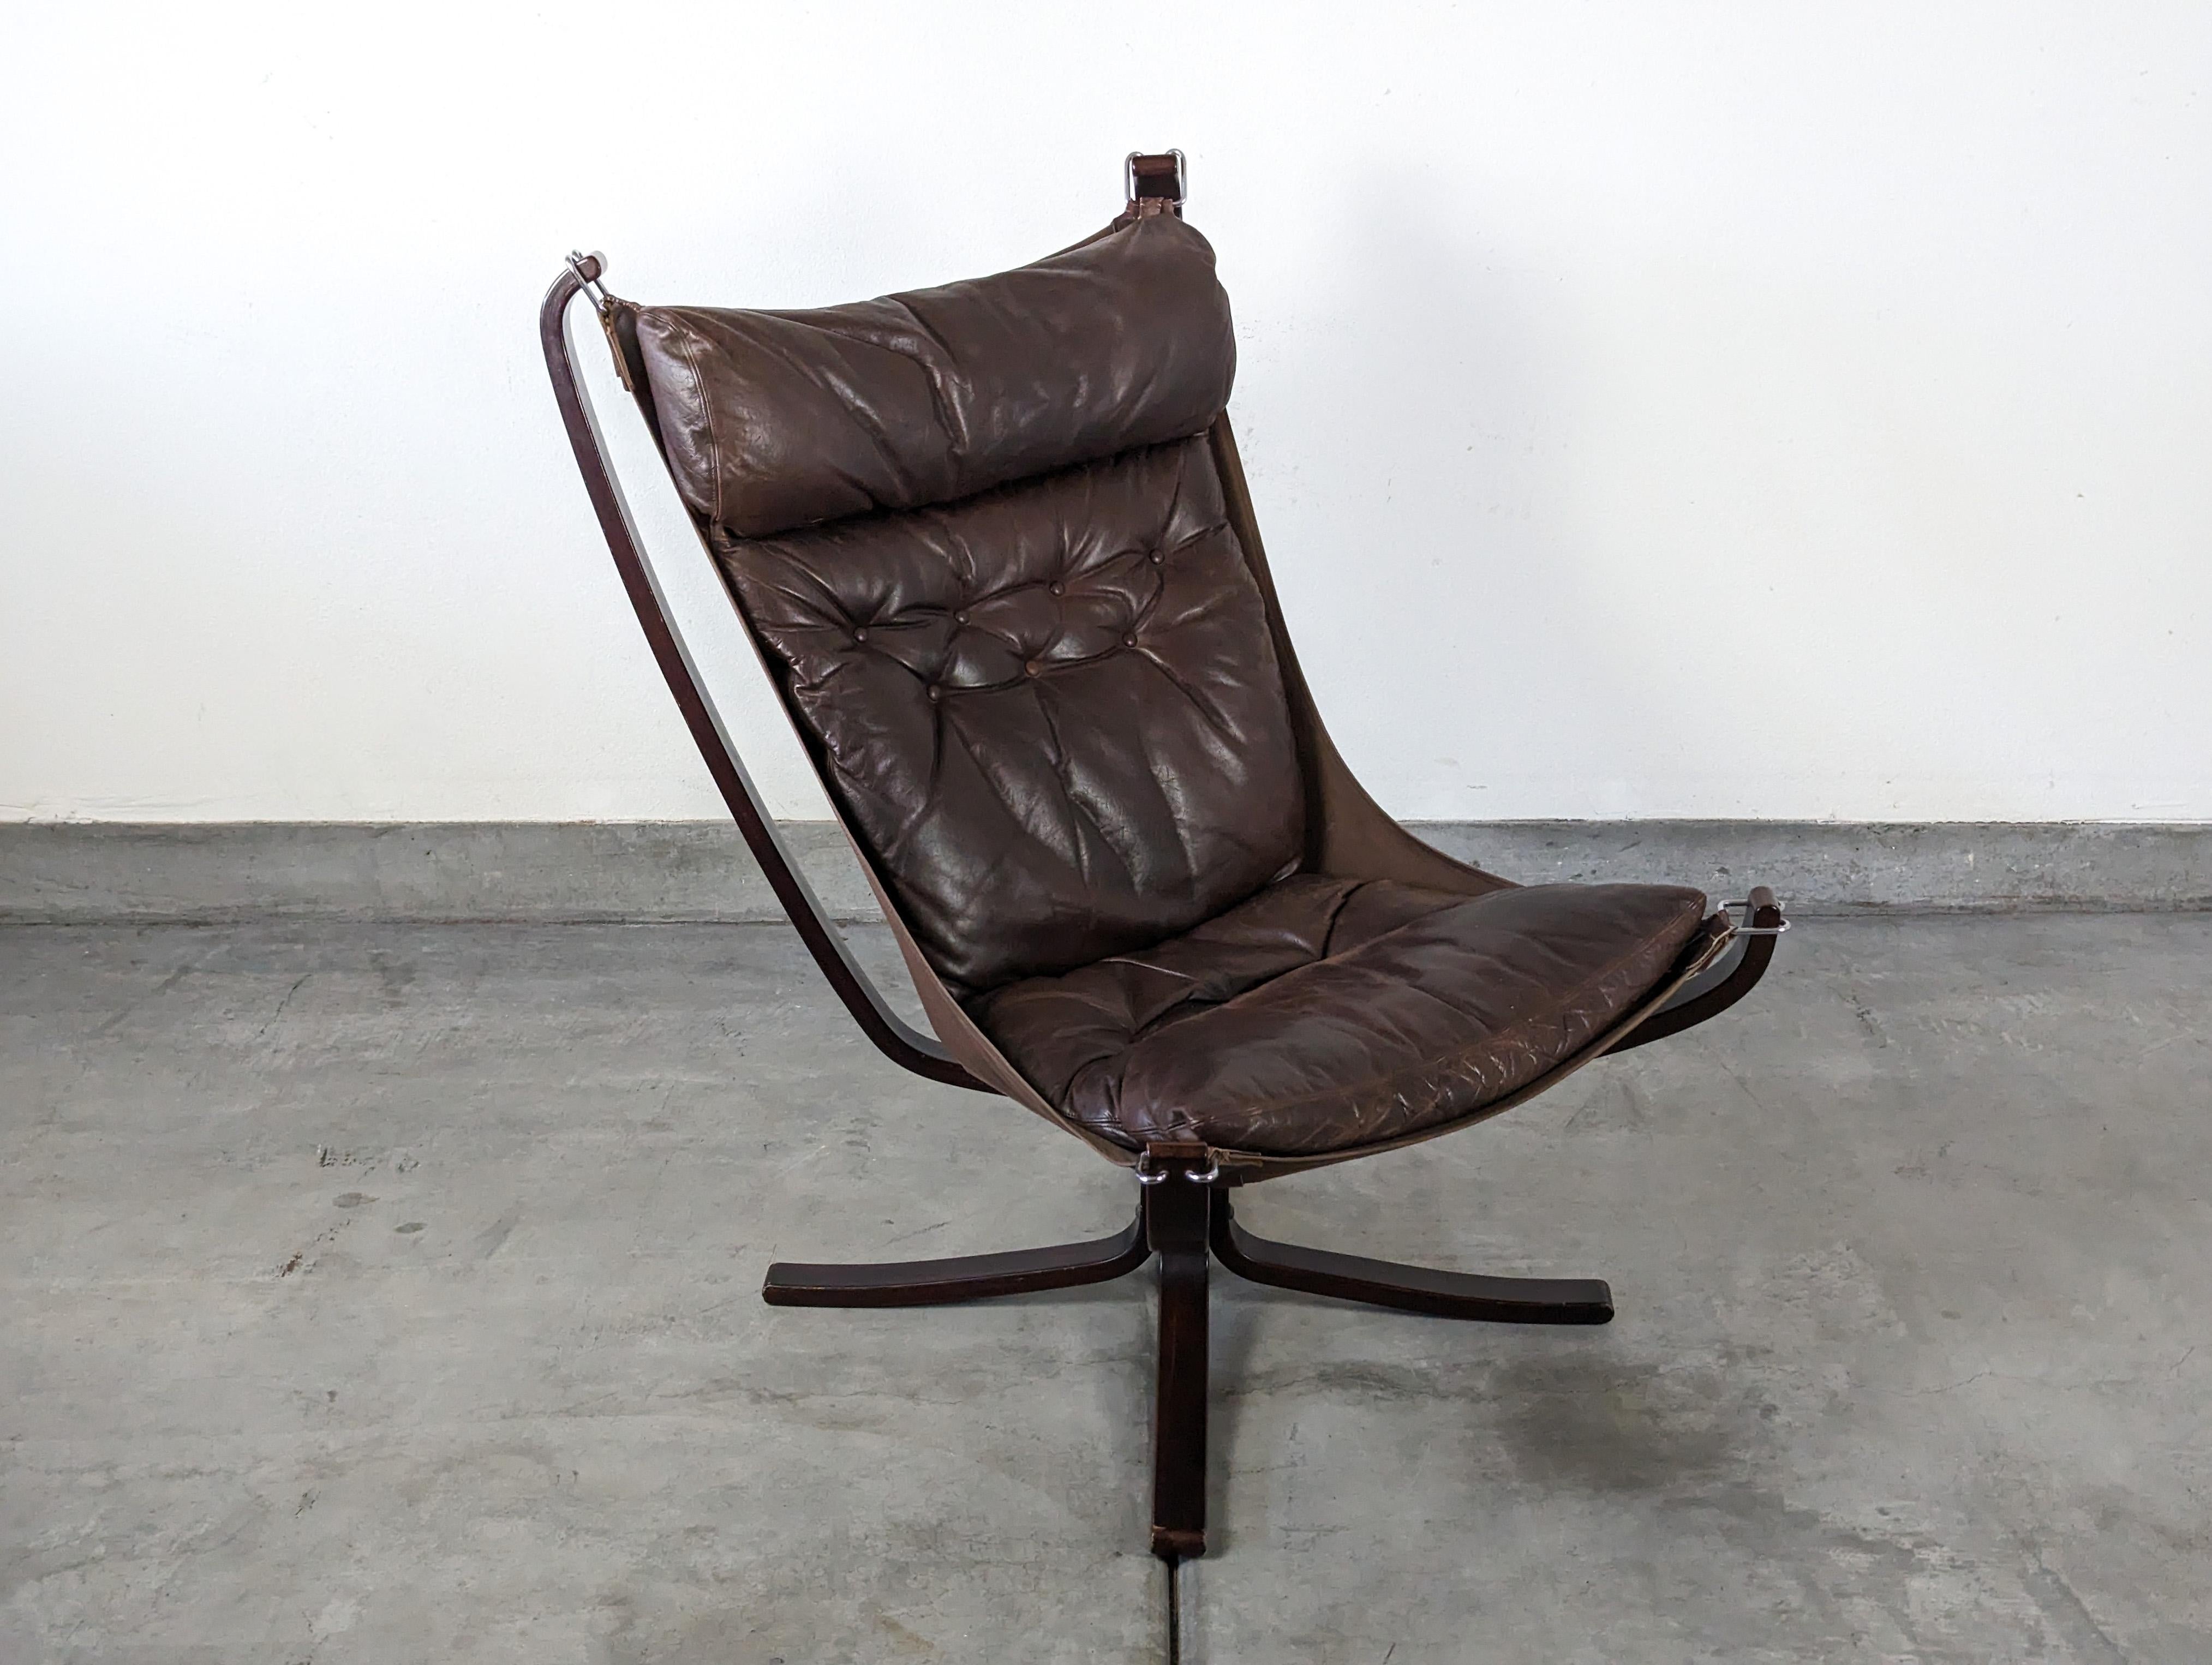 For sale is a 1970s original Falcon Chair, a standout piece of Scandinavian design by the esteemed Norwegian designer, Sigurd Resell, for Vatne Mobler. This iconic chair features an elegant ebonized bentwood frame that perfectly contrasts with its